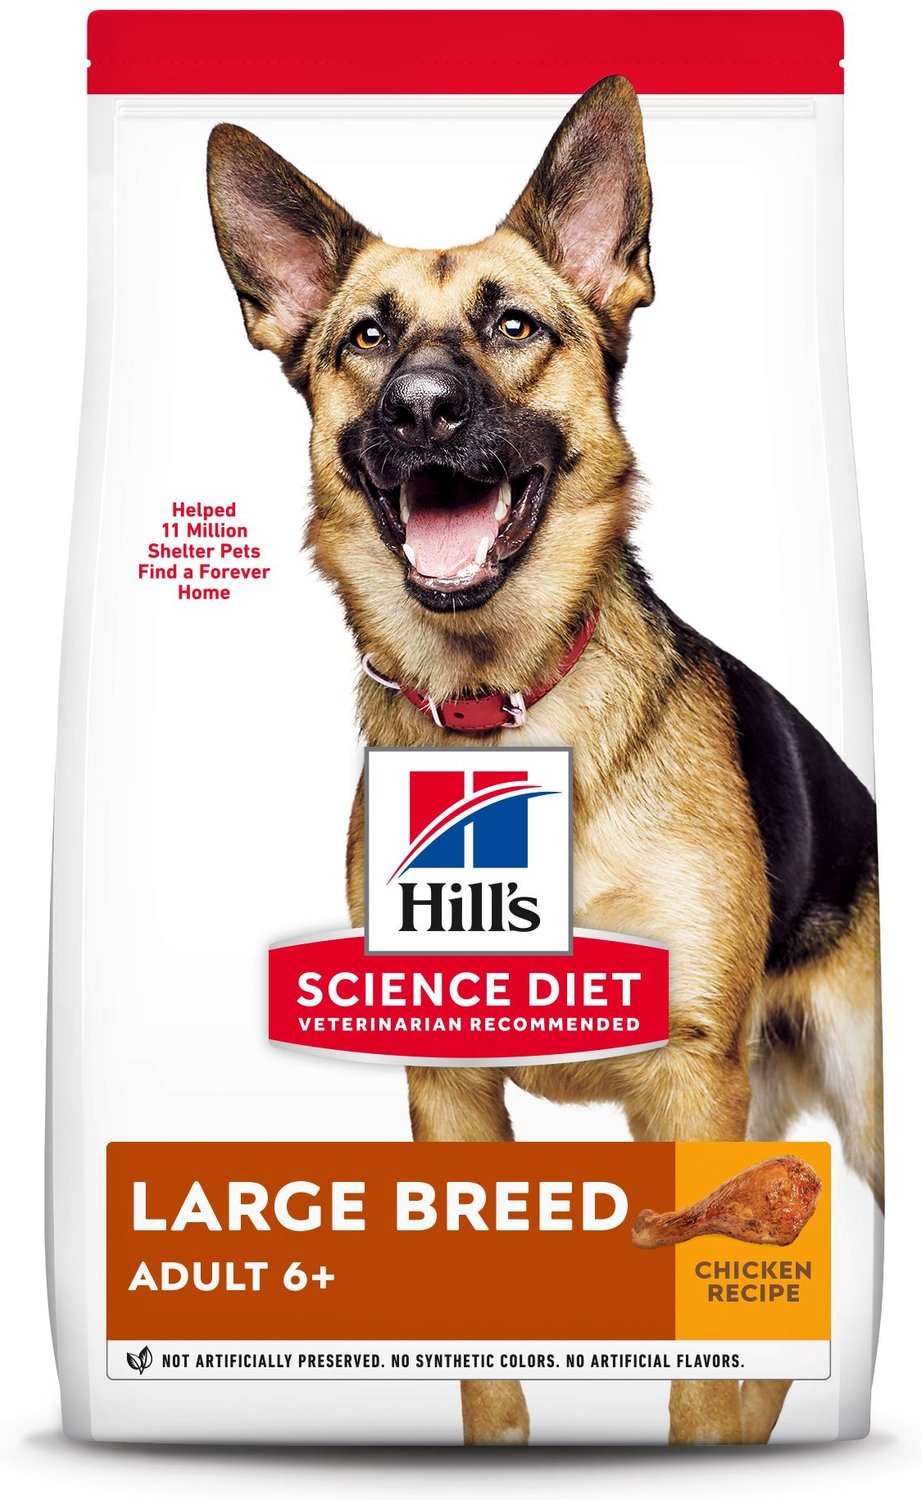 Hill's Science Diet Adult 6+Large Breed Chicken Meal, Barley & Rice Dry Dog Food